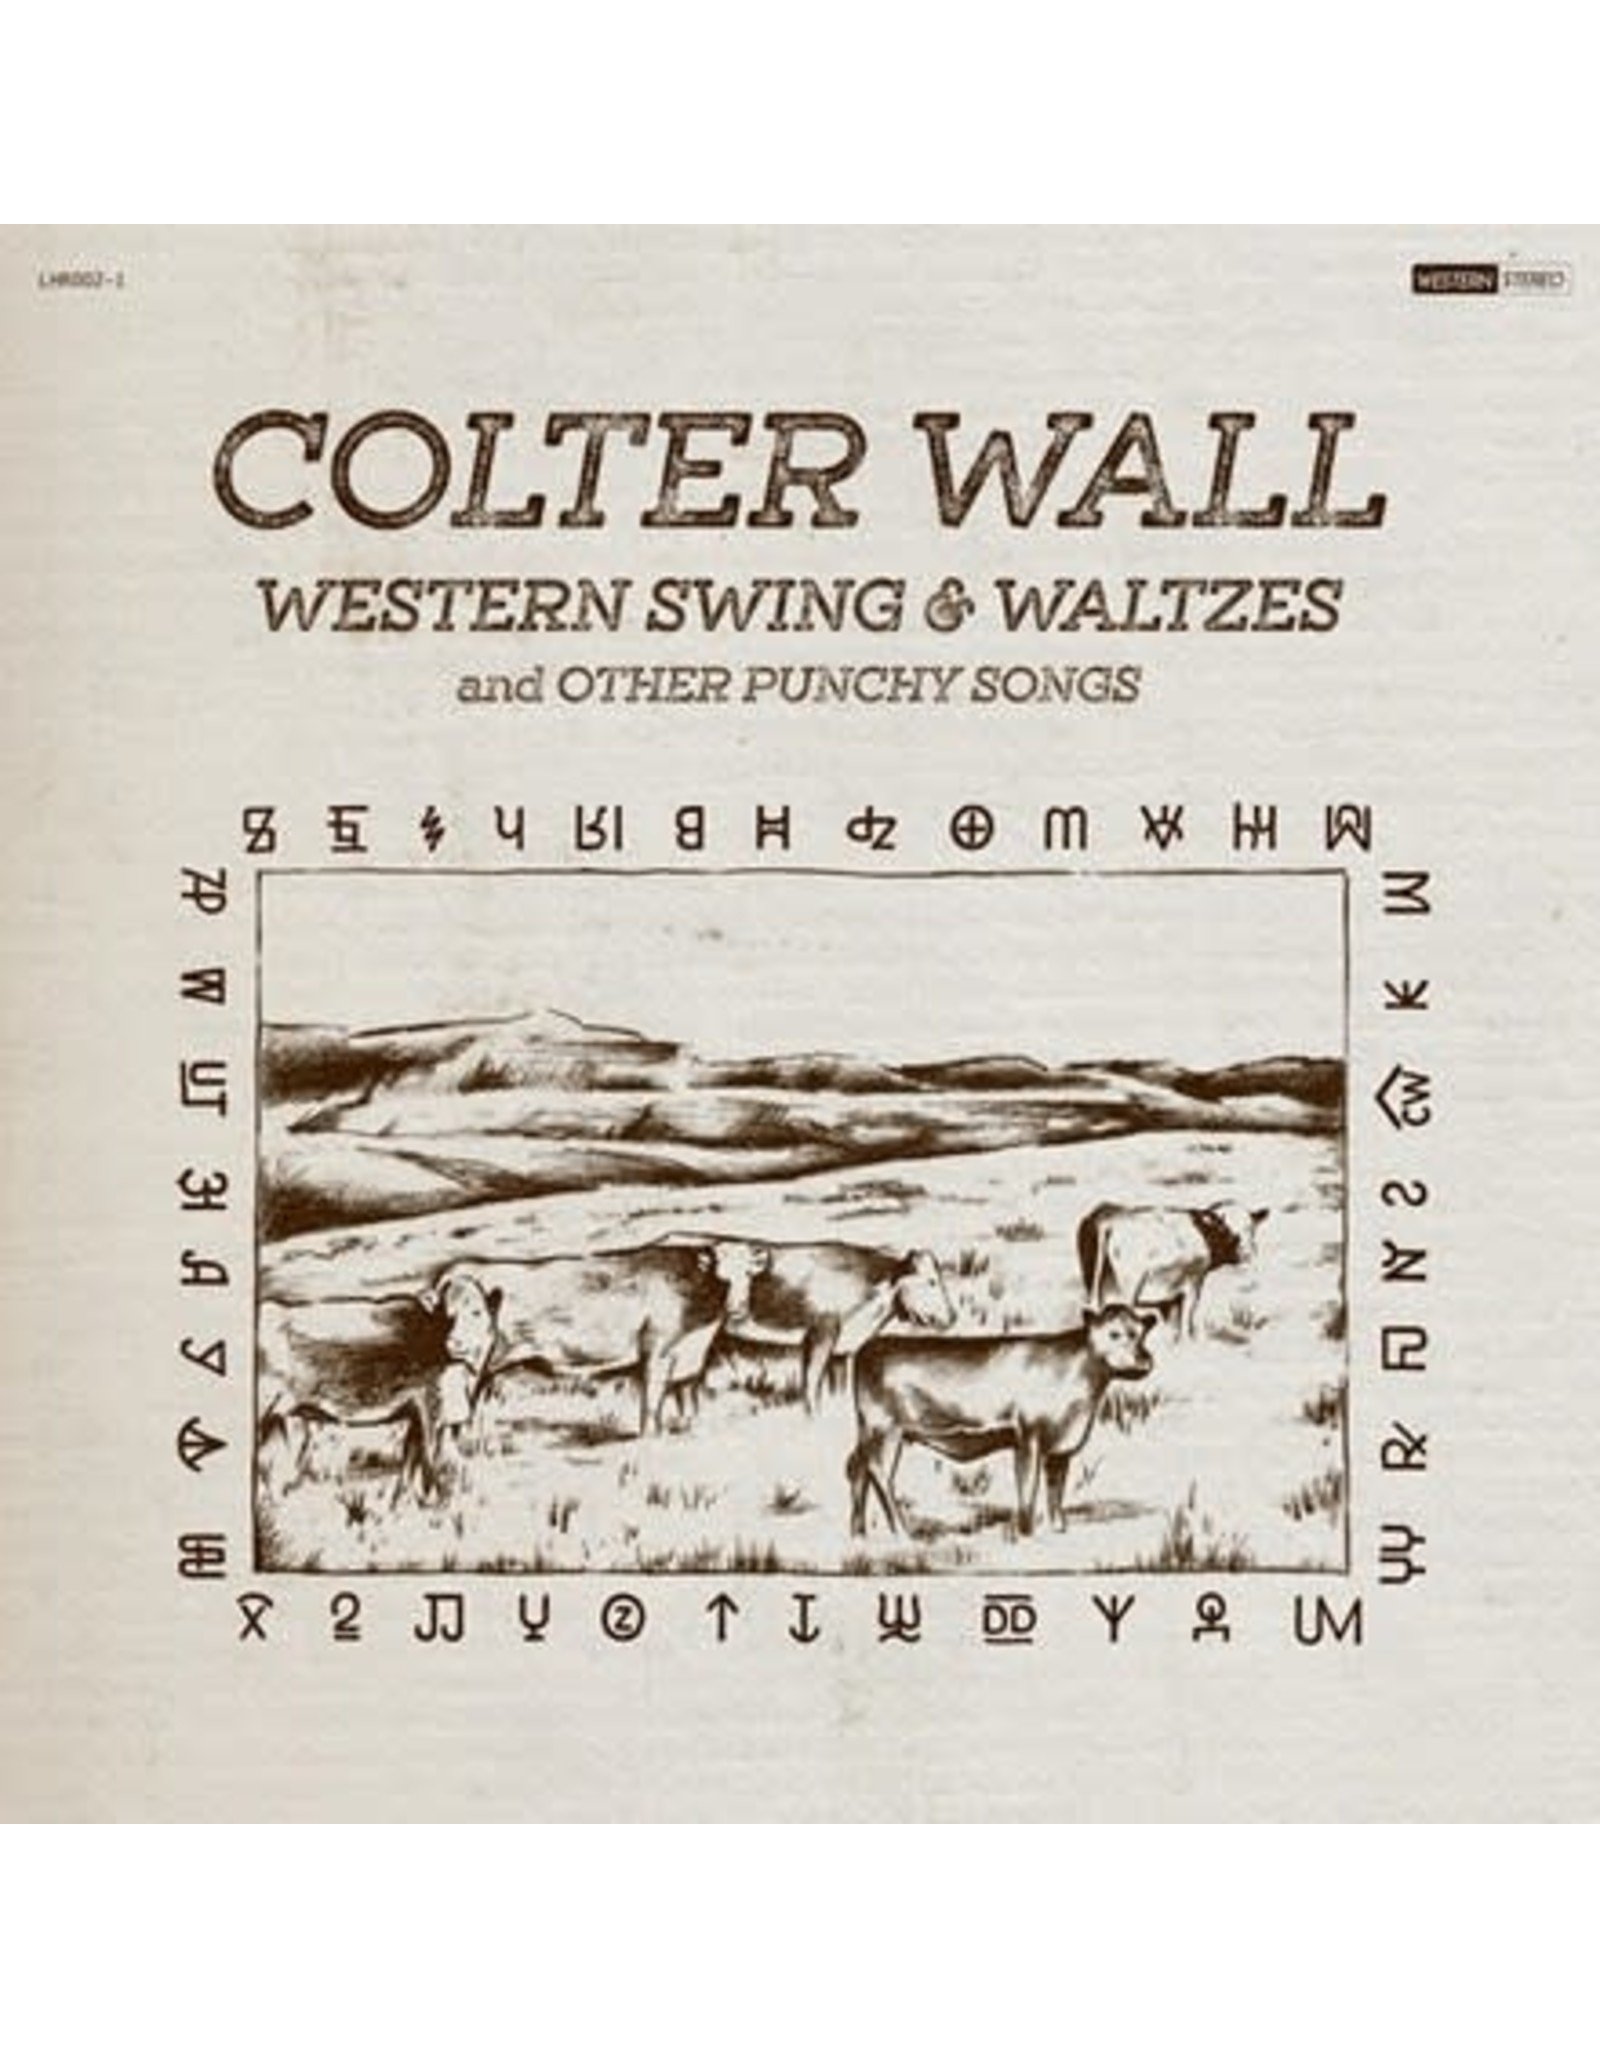 Thirty Tigers Wall, Colter: Western Swing & Waltzes and Other Punchy Songs LP